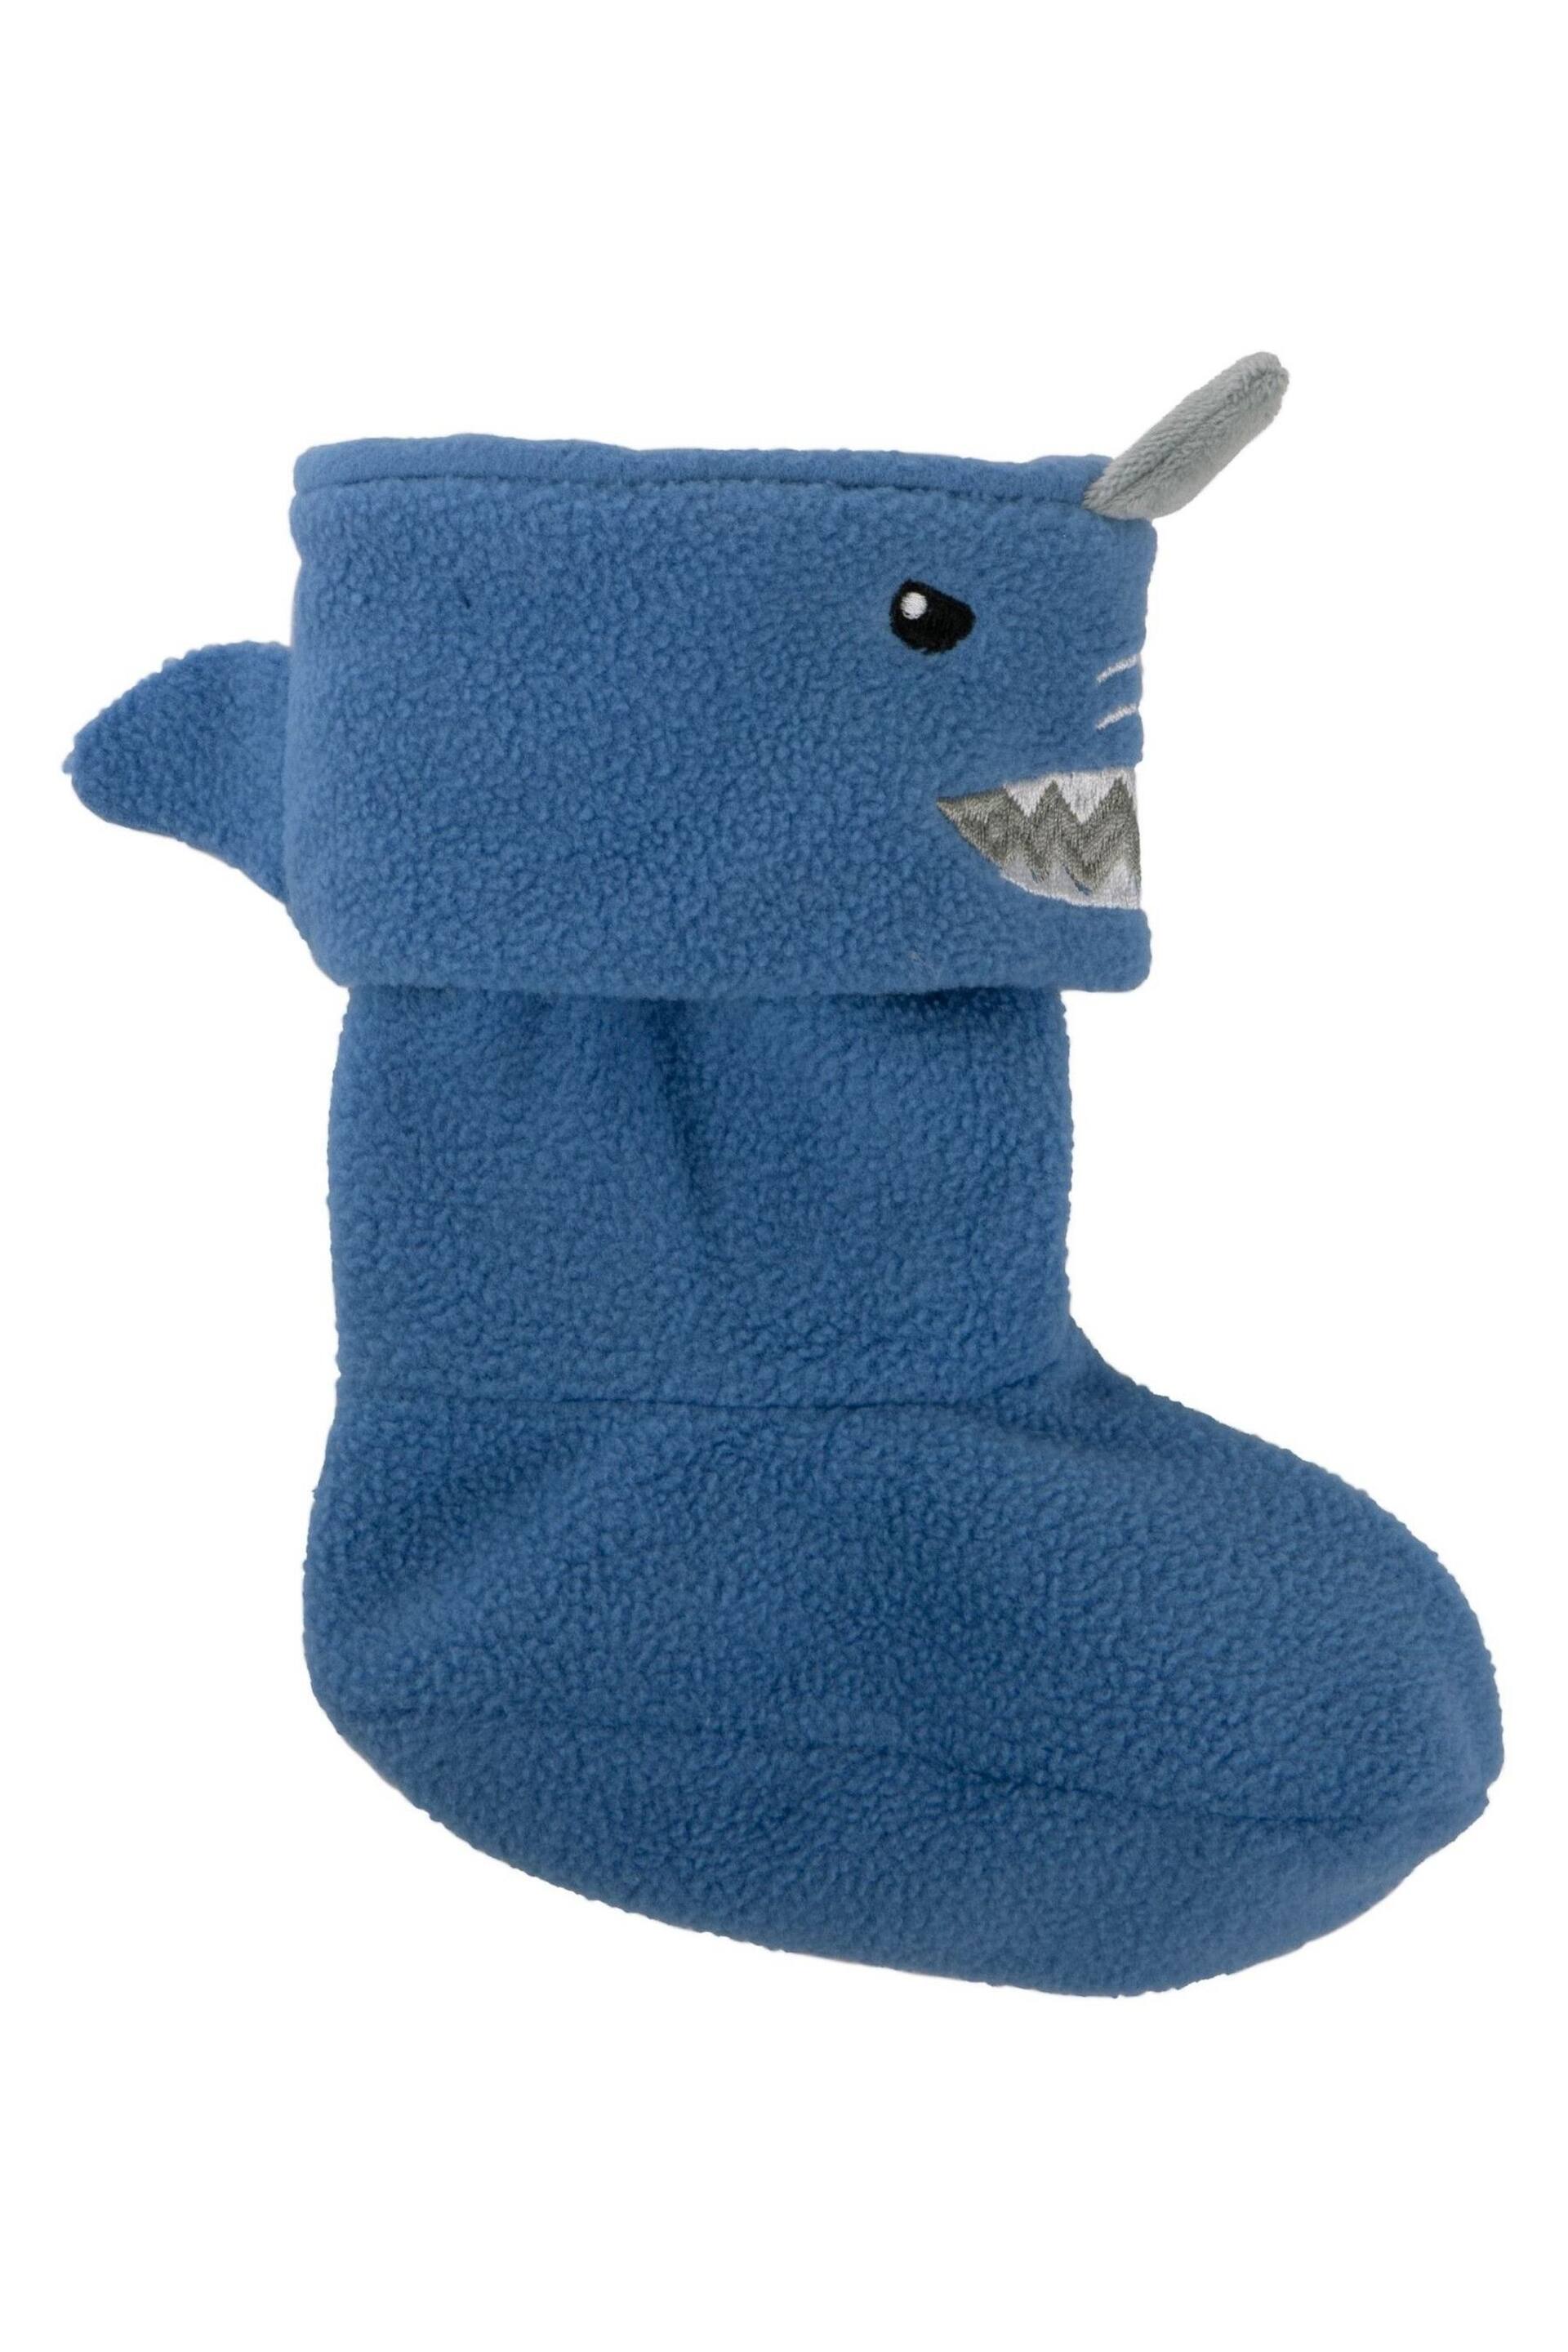 Totes Blue Childrens Bunny Welly Liner Socks - Image 3 of 5